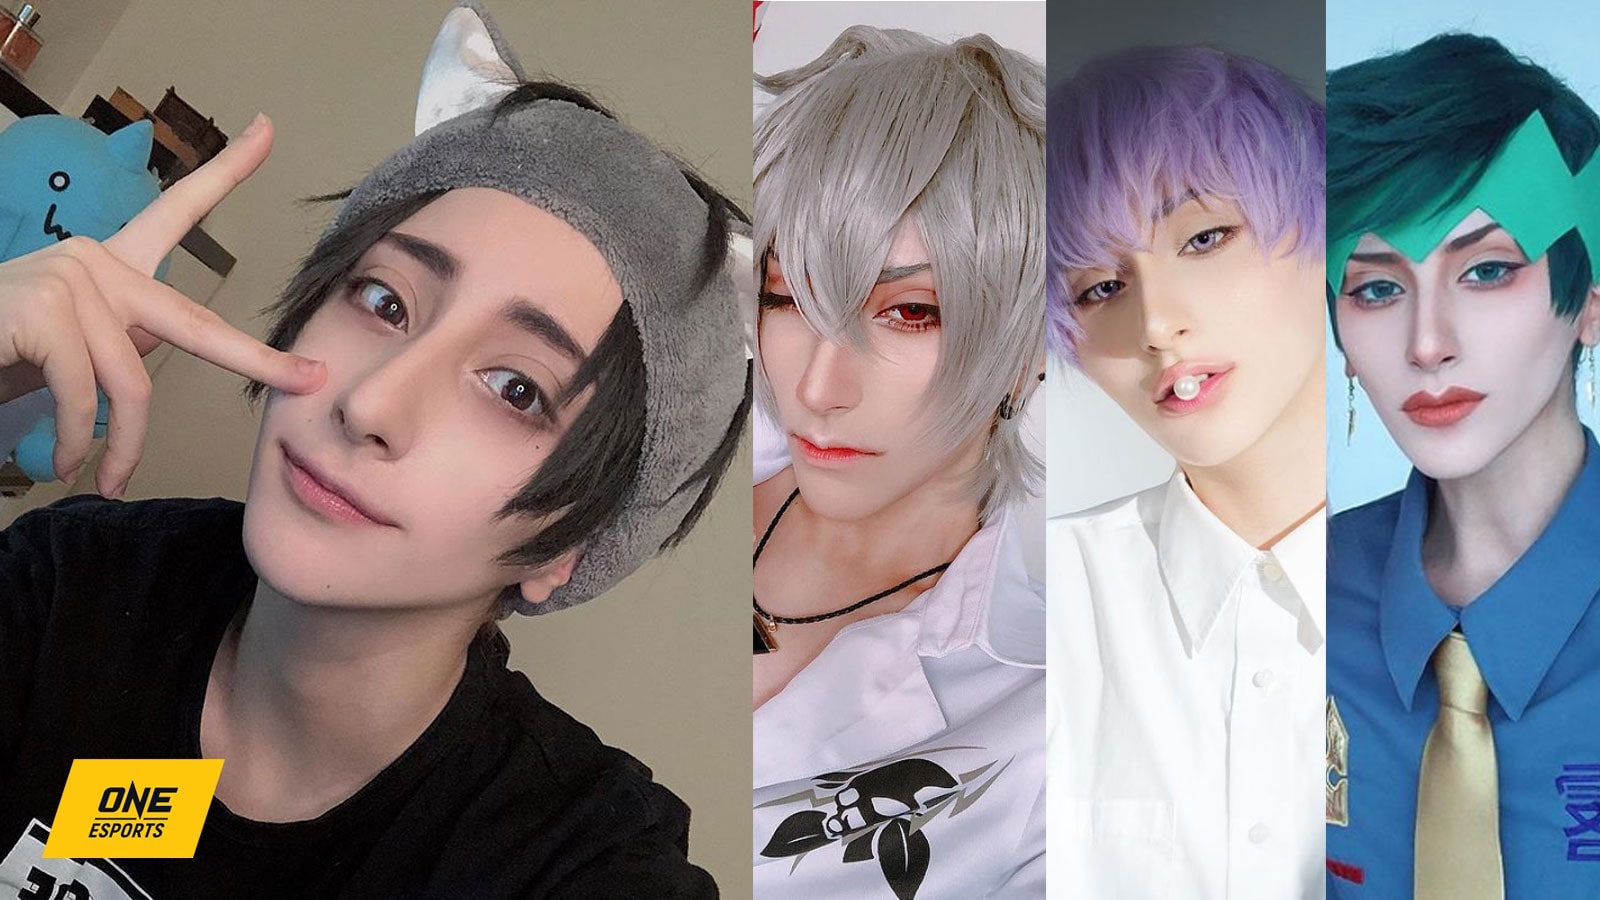 Learn the secrets behind cosplay makeup, skincare routines | ONE Esports